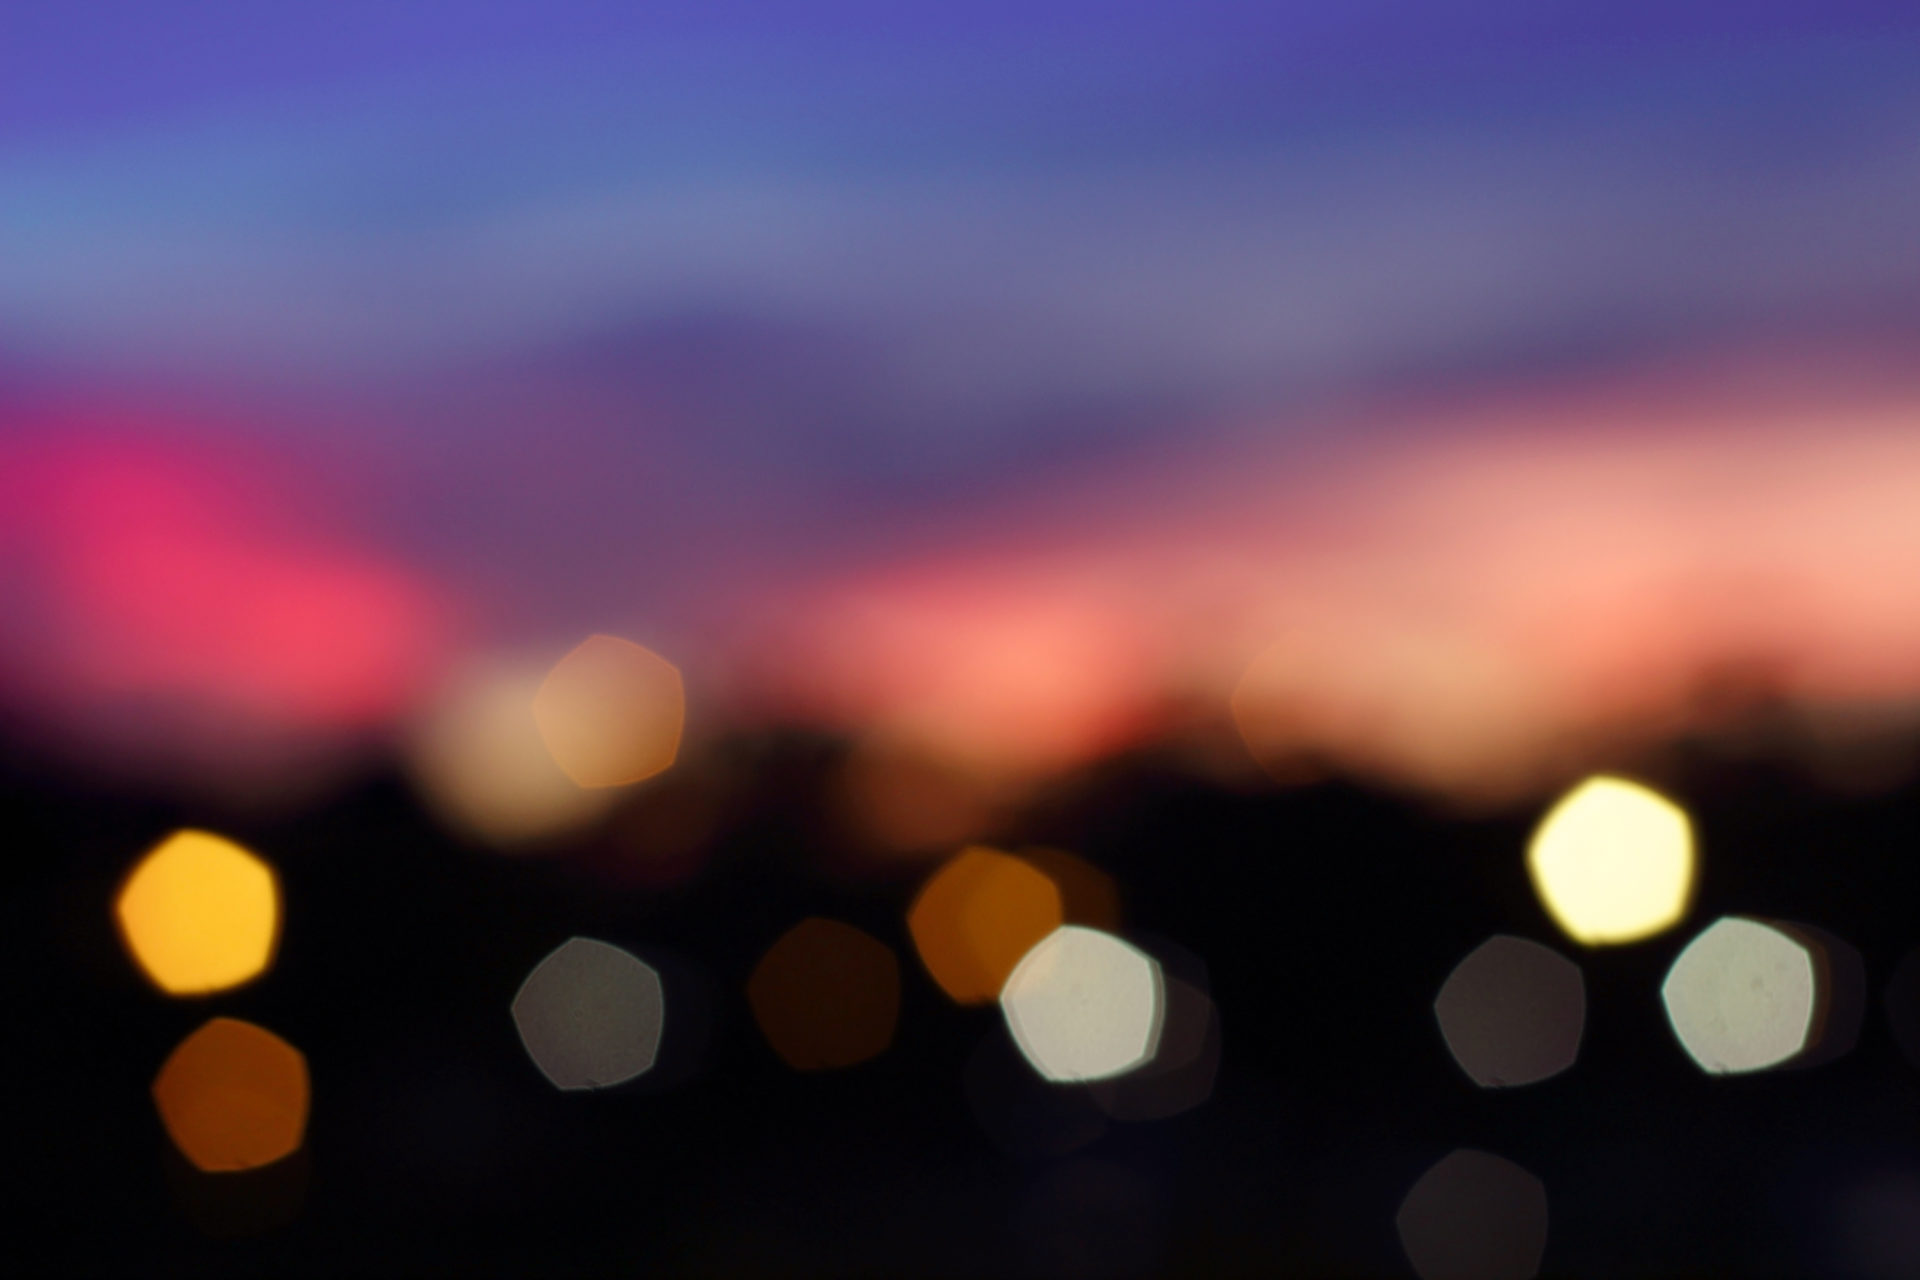 blurred and pixelated image of sunset view